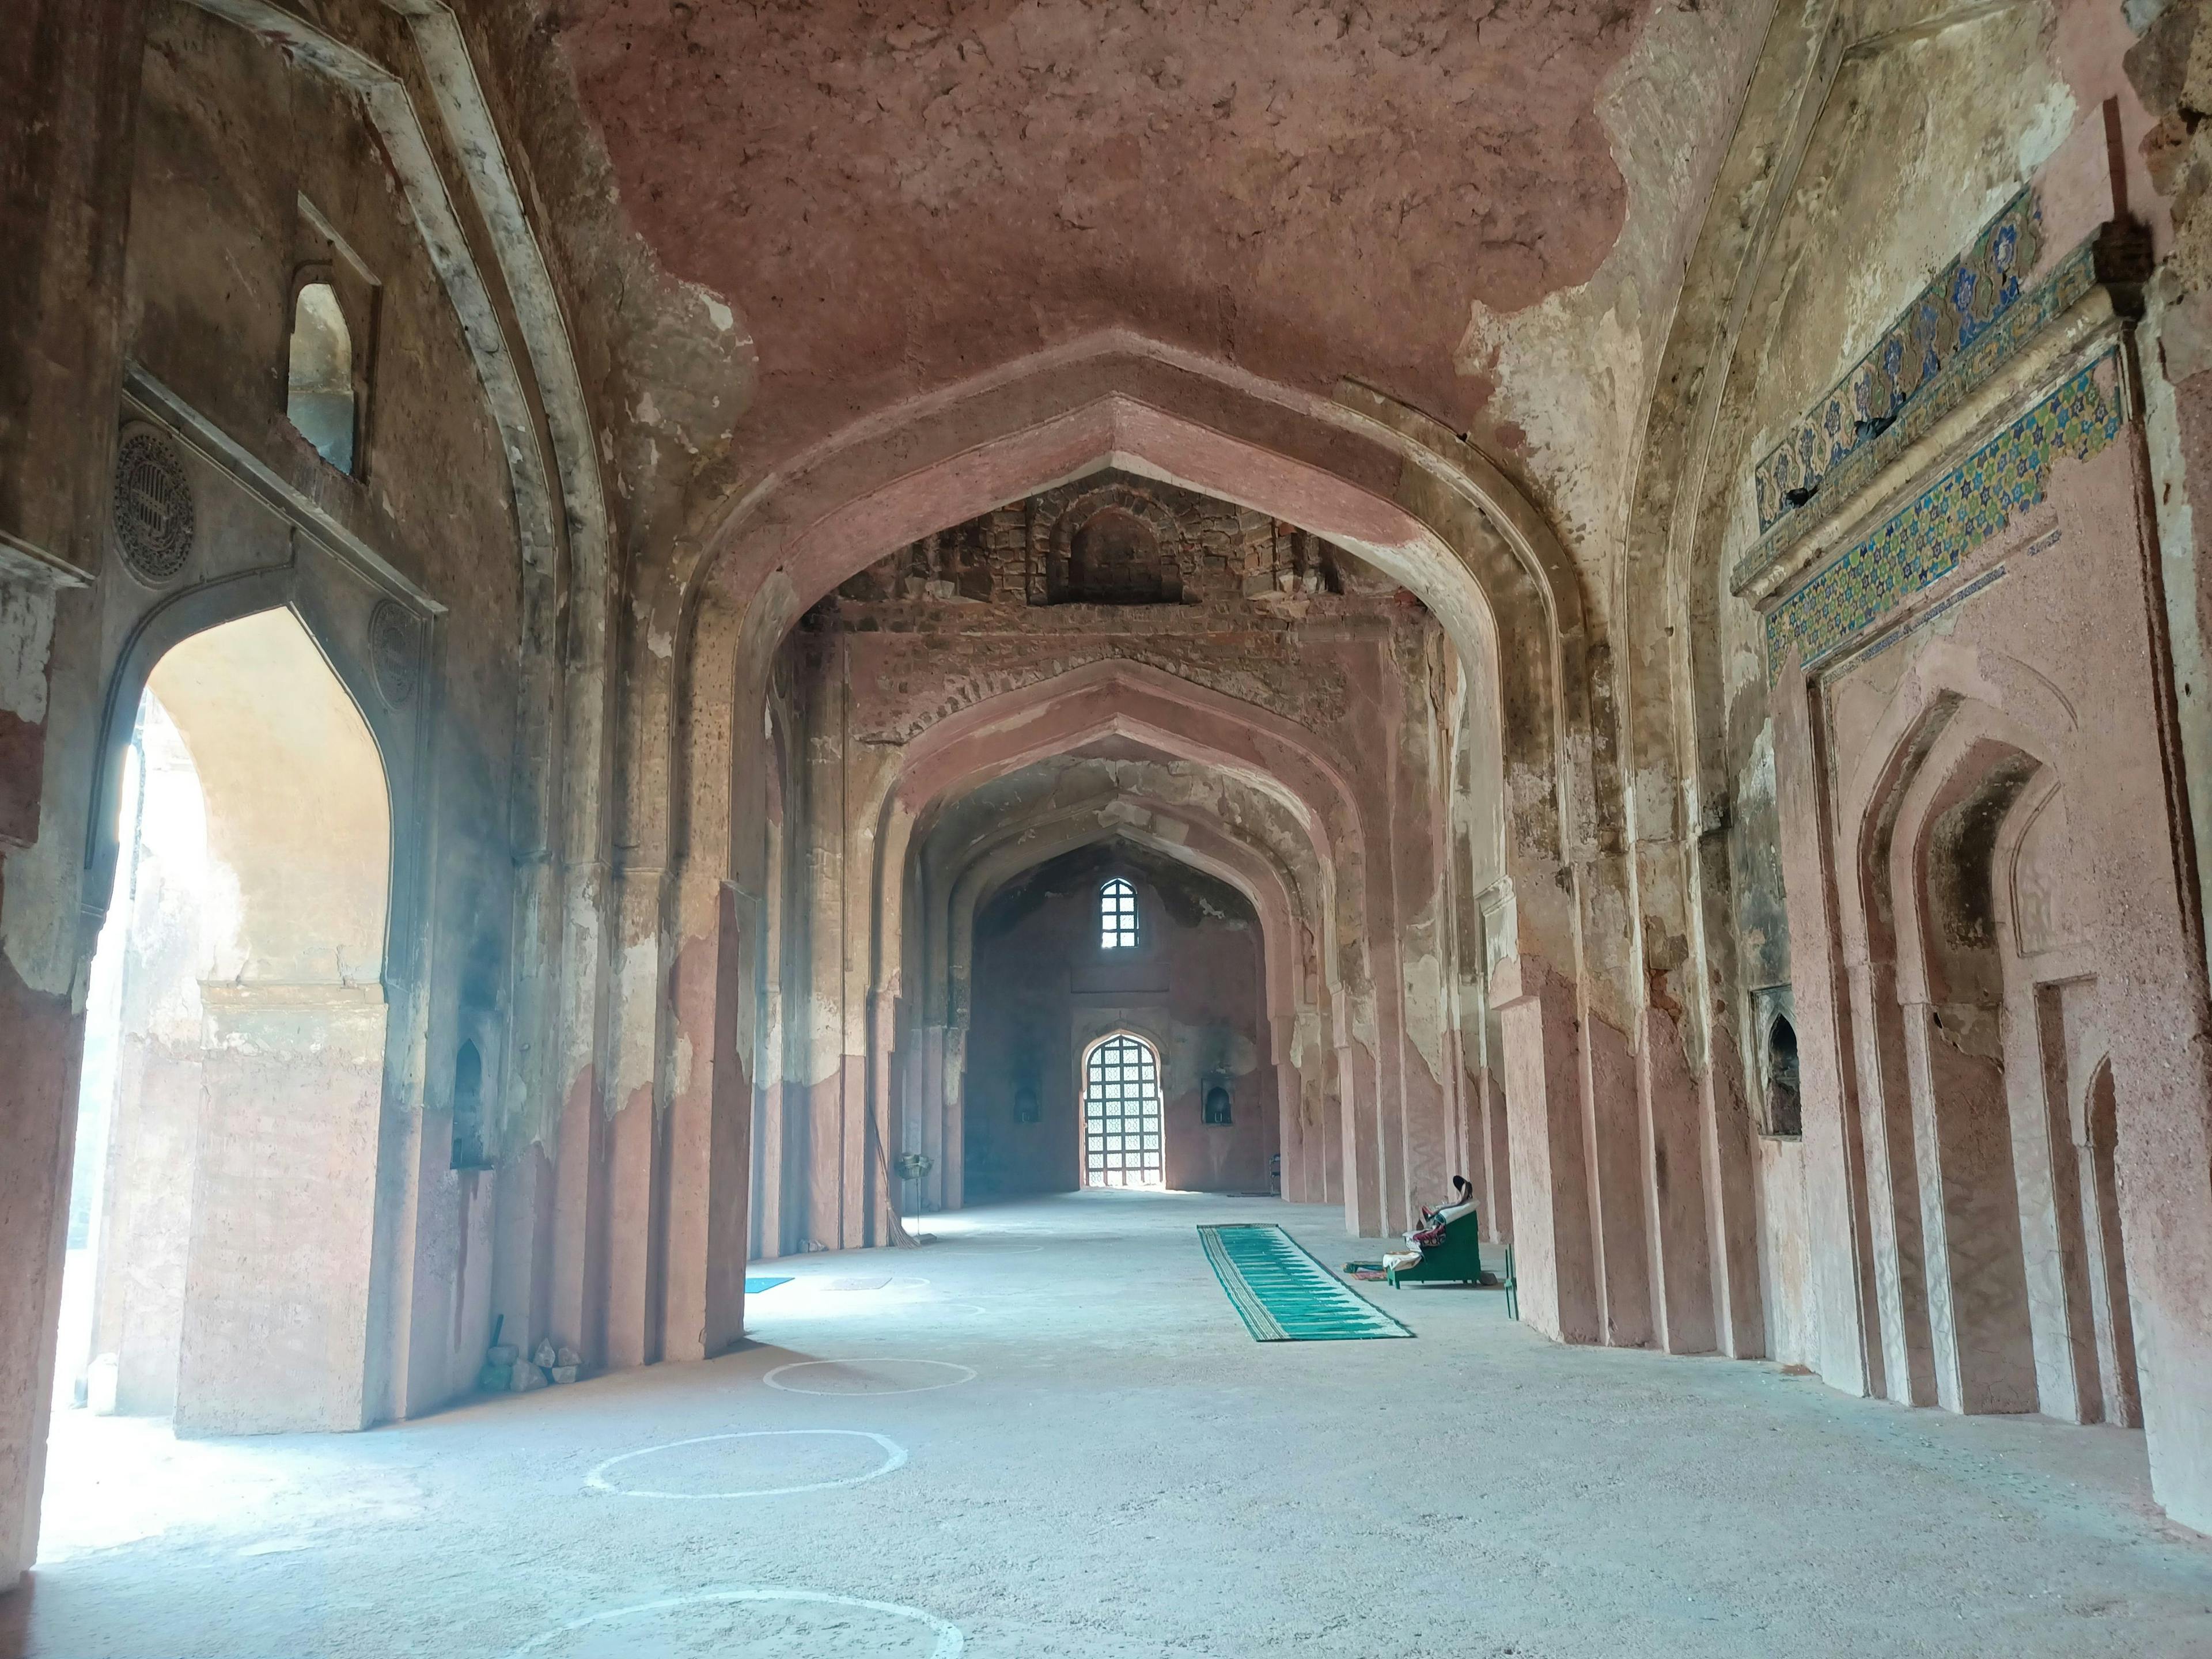 Interiors of the mosque